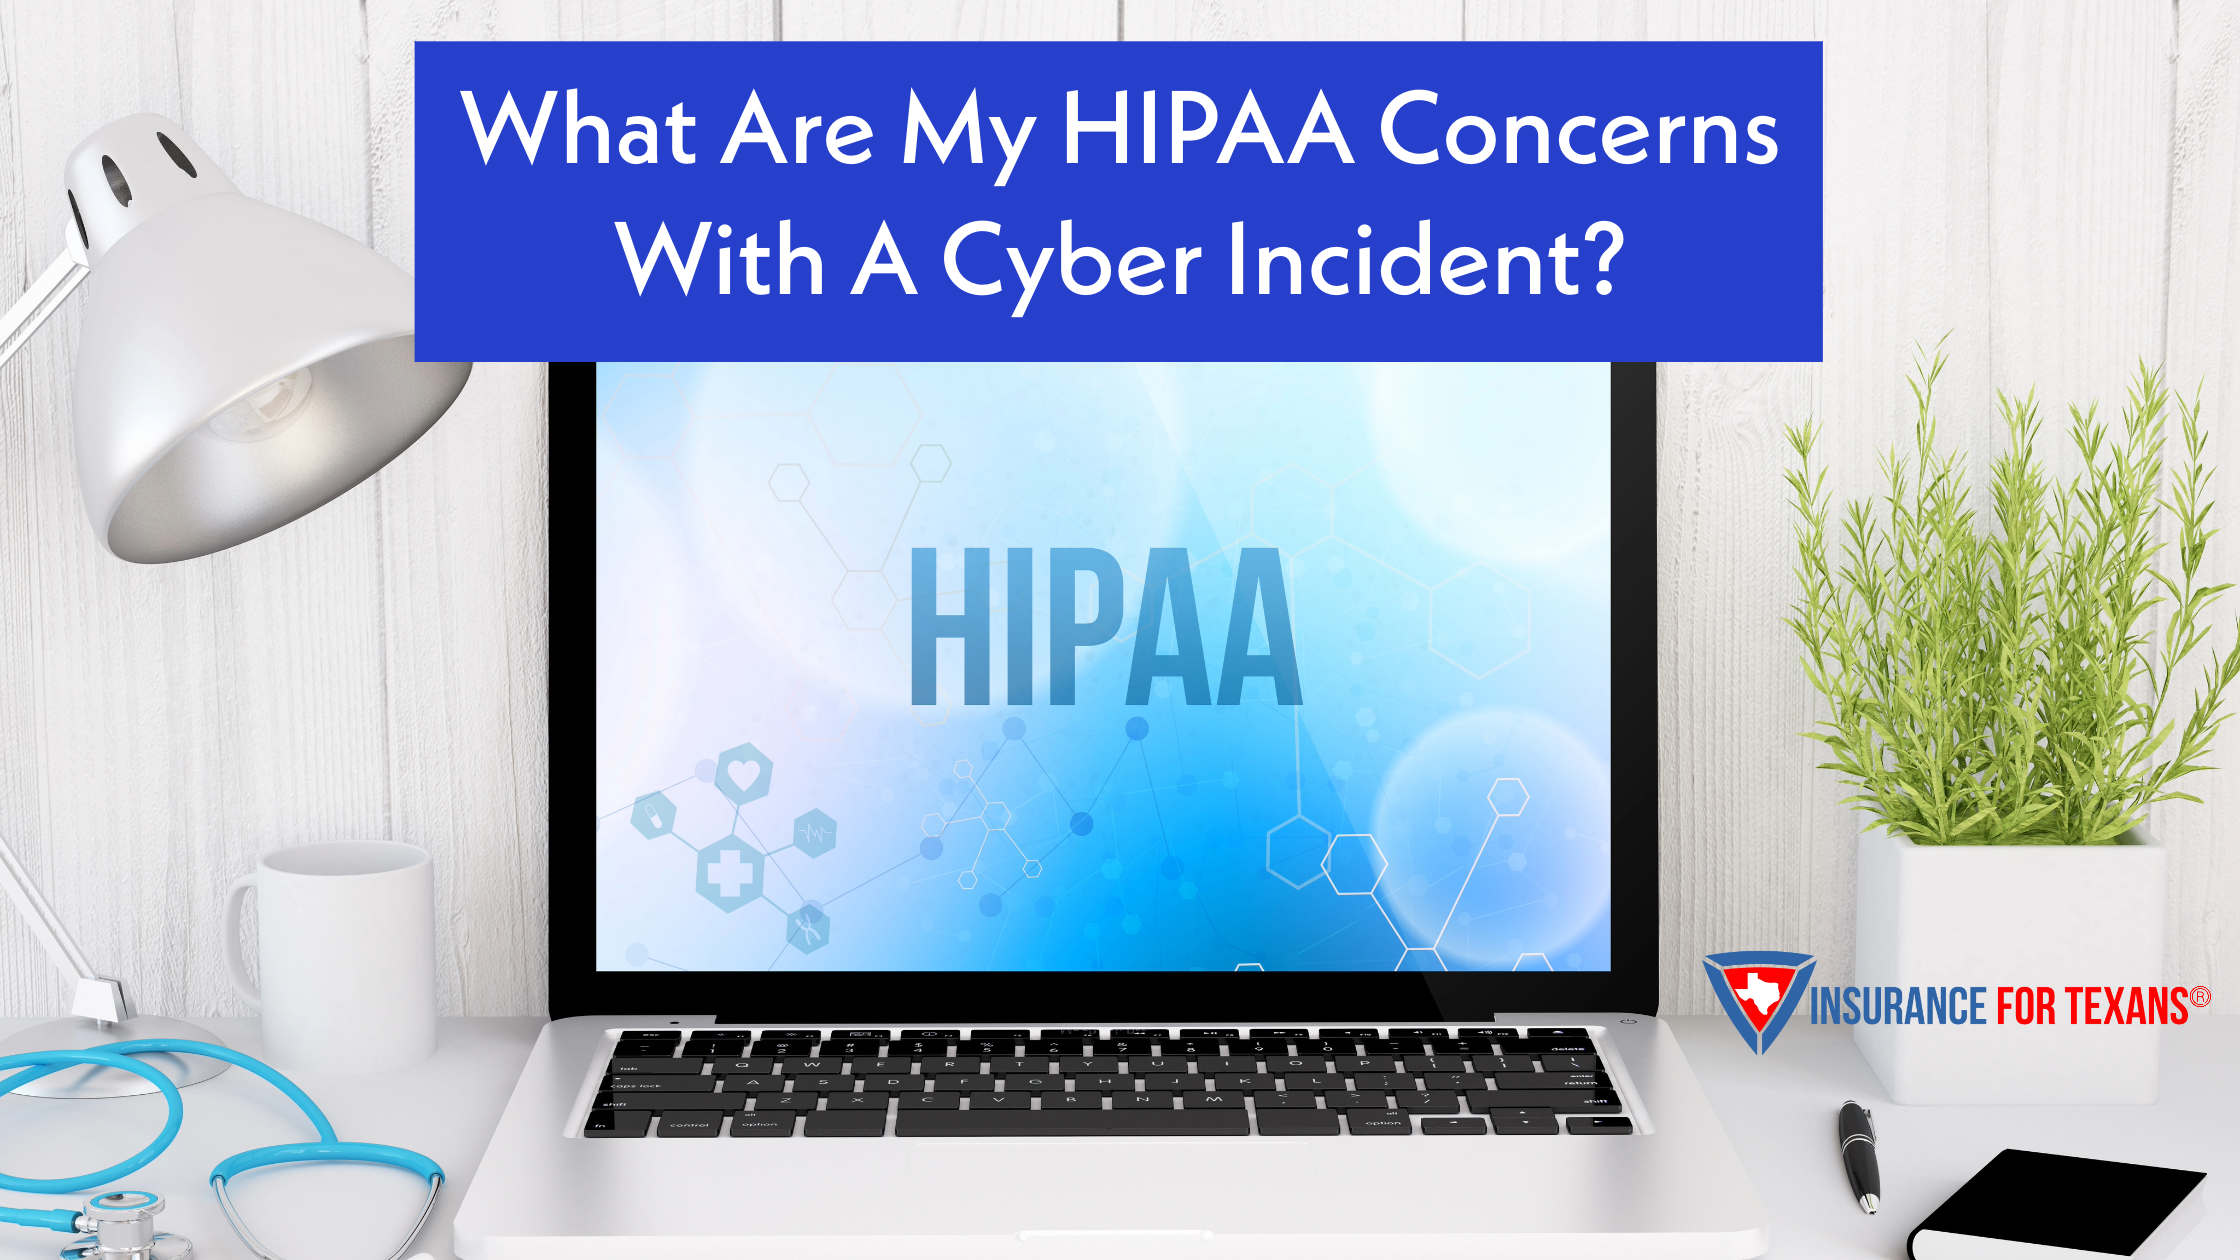 What Are My HIPAA Concerns With A Cyber Incident?